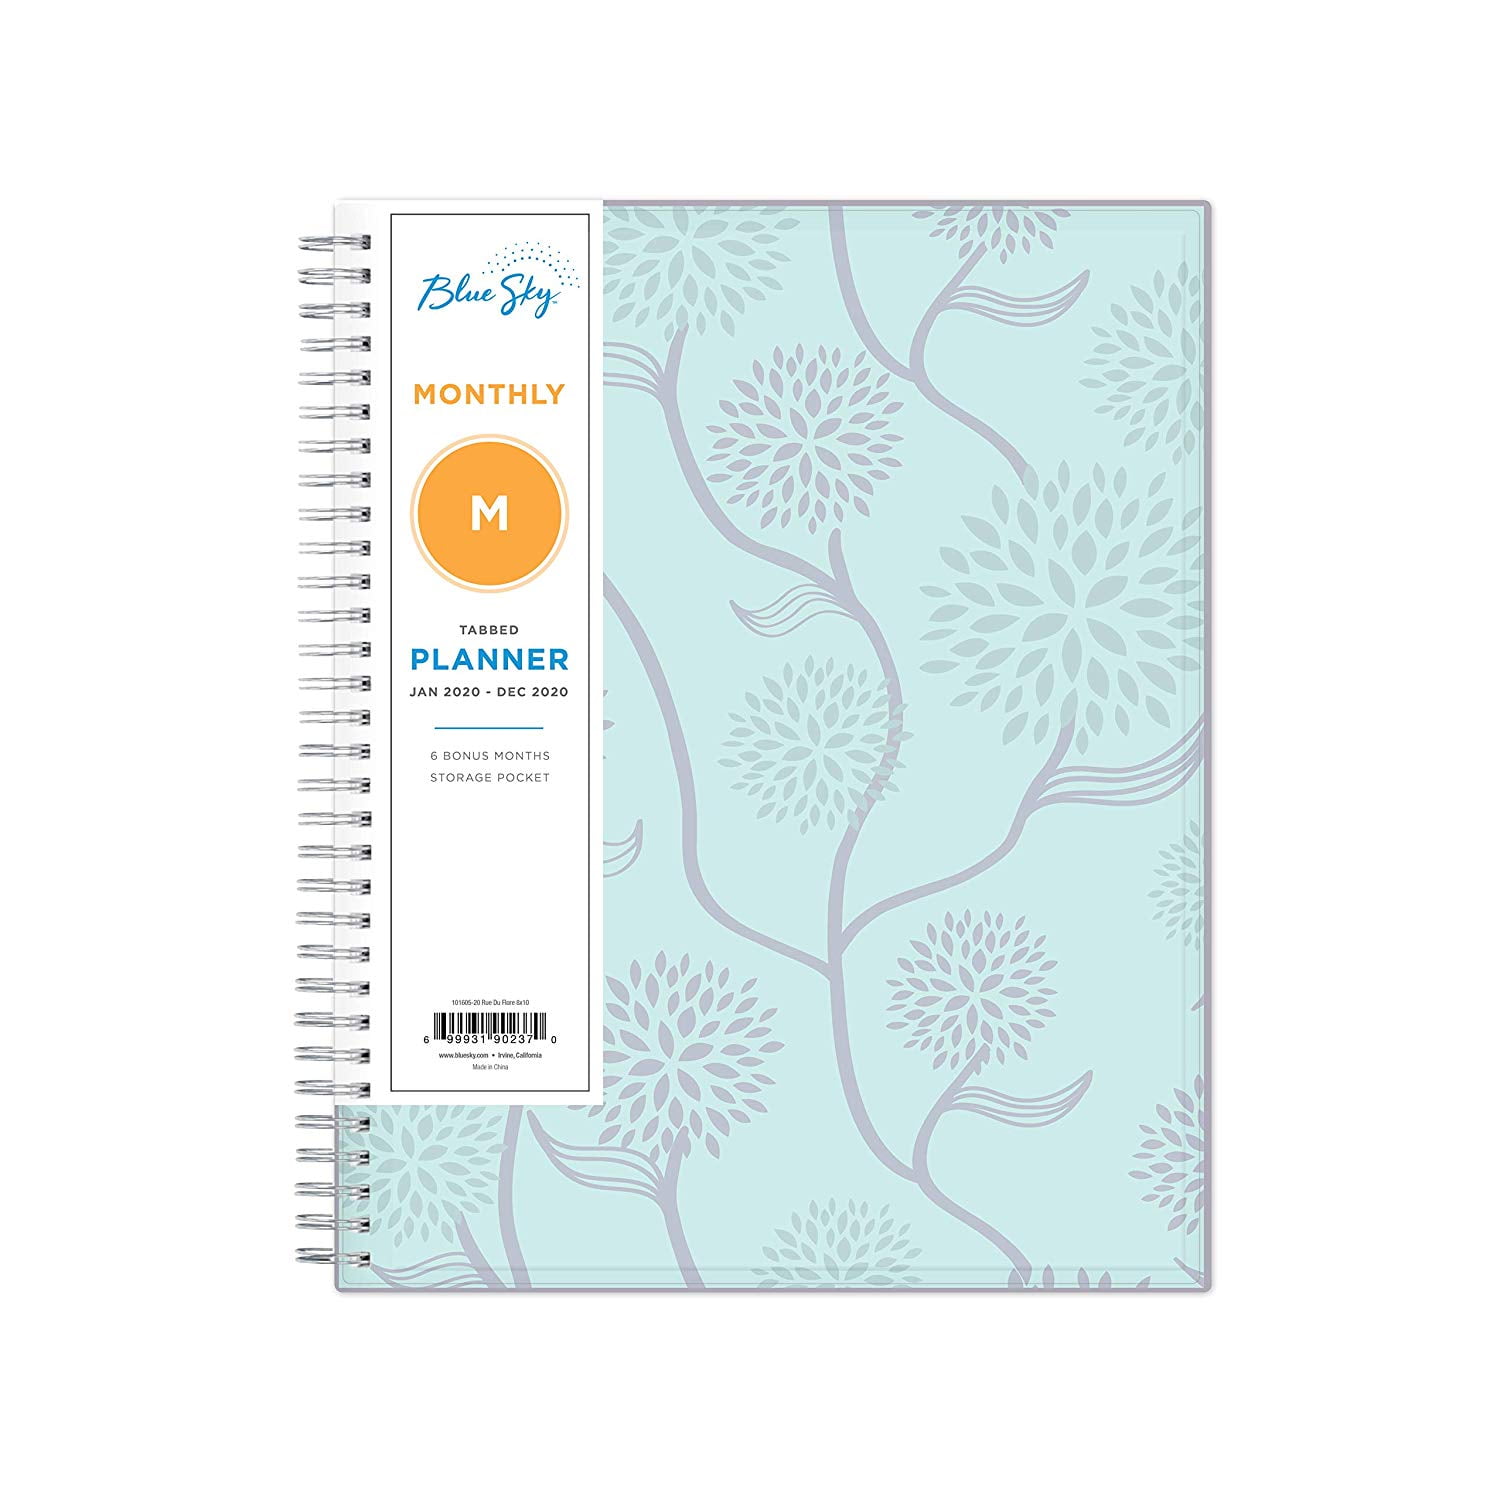 Blue Sky 2019 Weekly Monthly Planner Organizer Flexible Cover Twin-wire Binding for sale online 